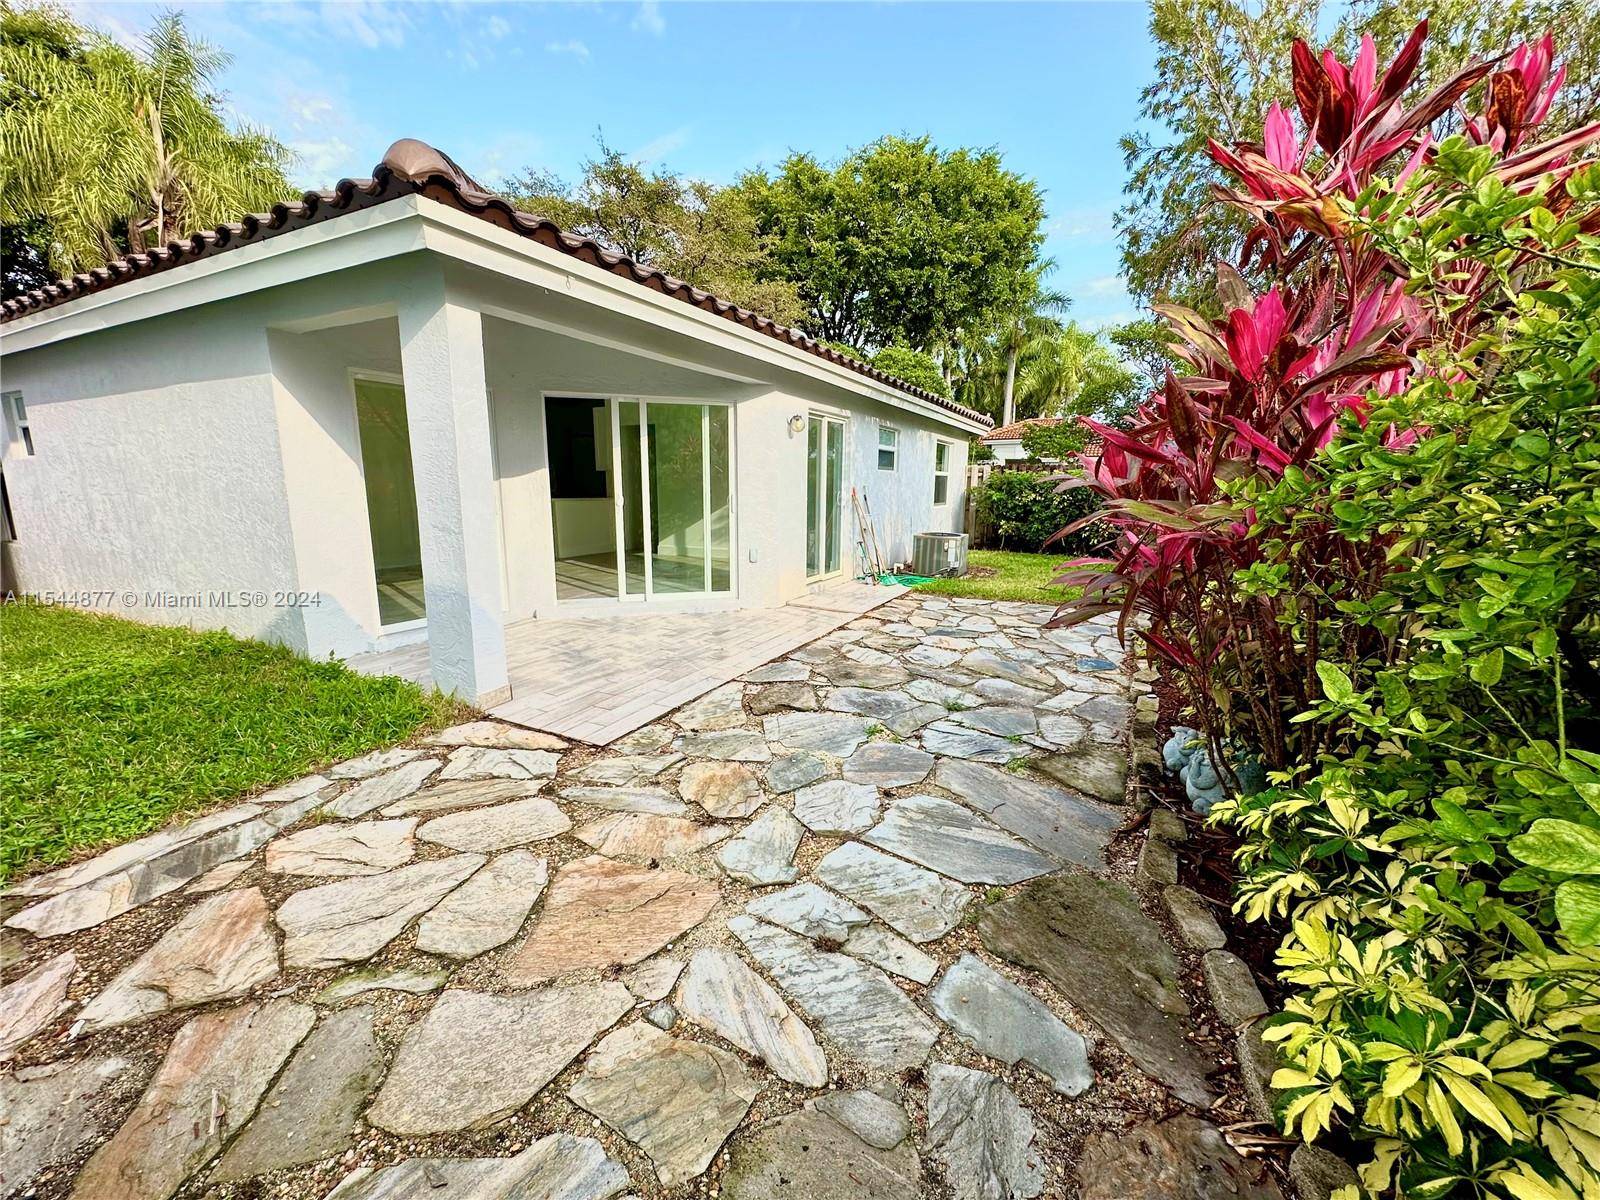 GORGEOUS ONE STORY SINGLE FAMILY HOME COMPLETELY REMODELED IN THE HEART OF DORAL.